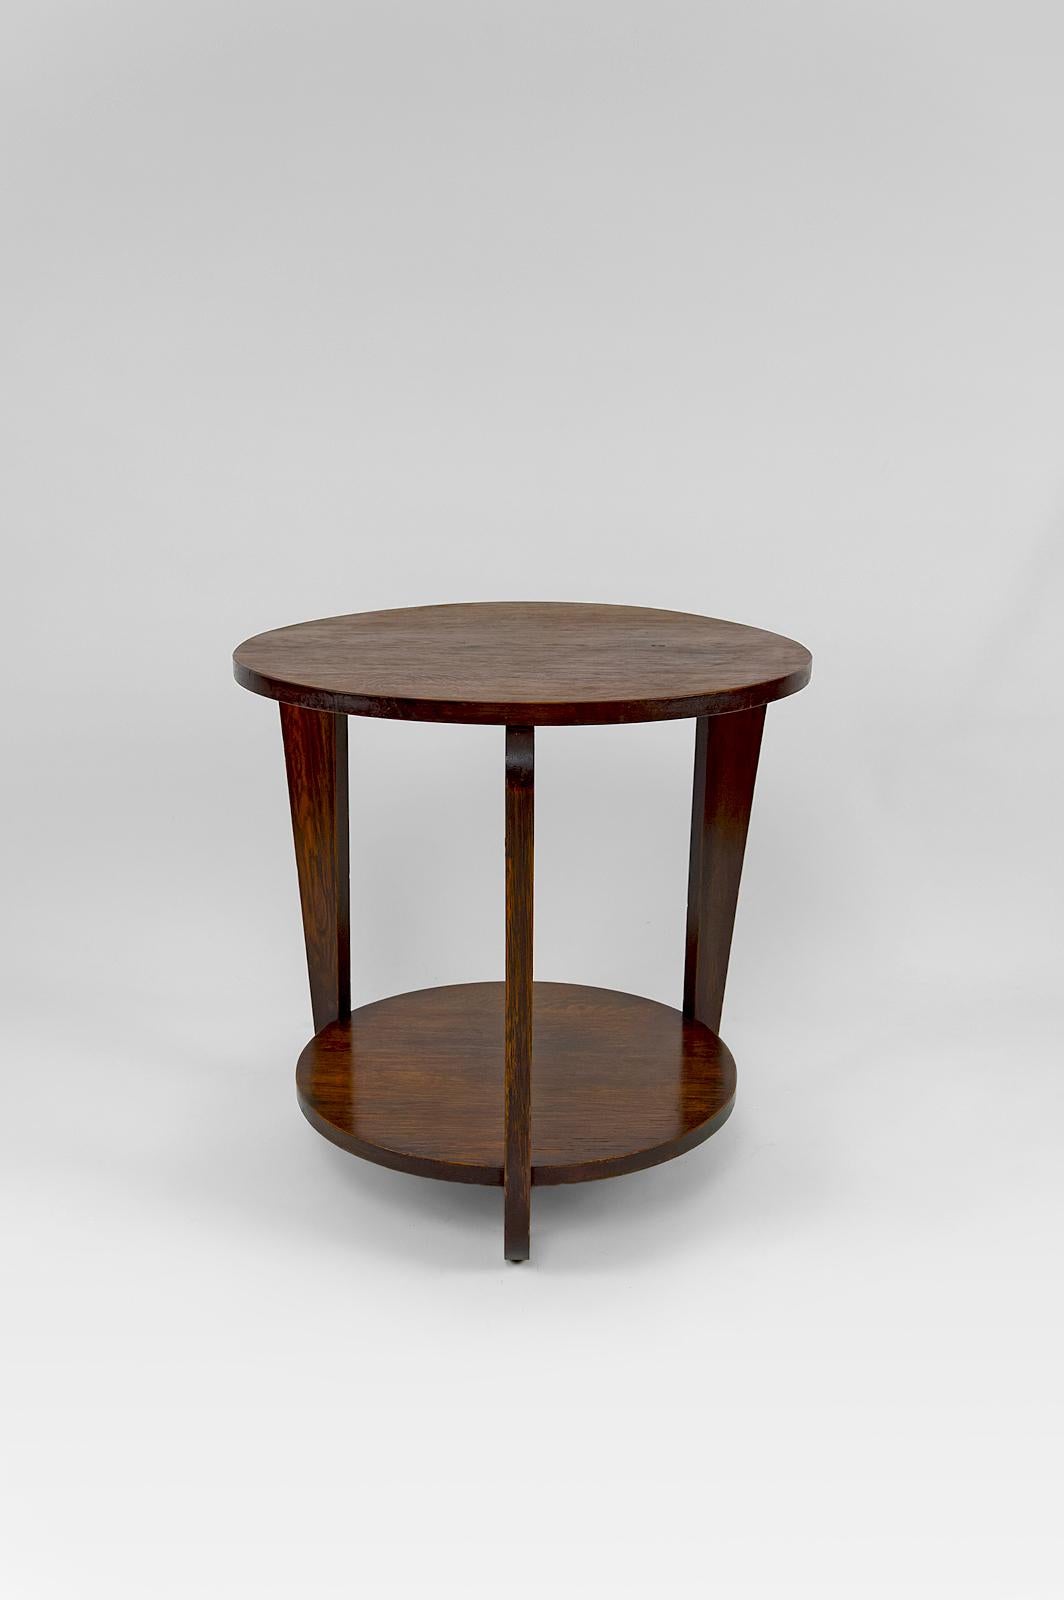 In the style of André Sornay's productions.

Tripod pedestal table with 2 trays
Art Deco.
France, Circa 1930.
In smoked oak.

In excellent condition.

Dimensions:
height 58 cm
diameter 67 cm

(Low shelf: height 12 cm, diameter 48 cm)